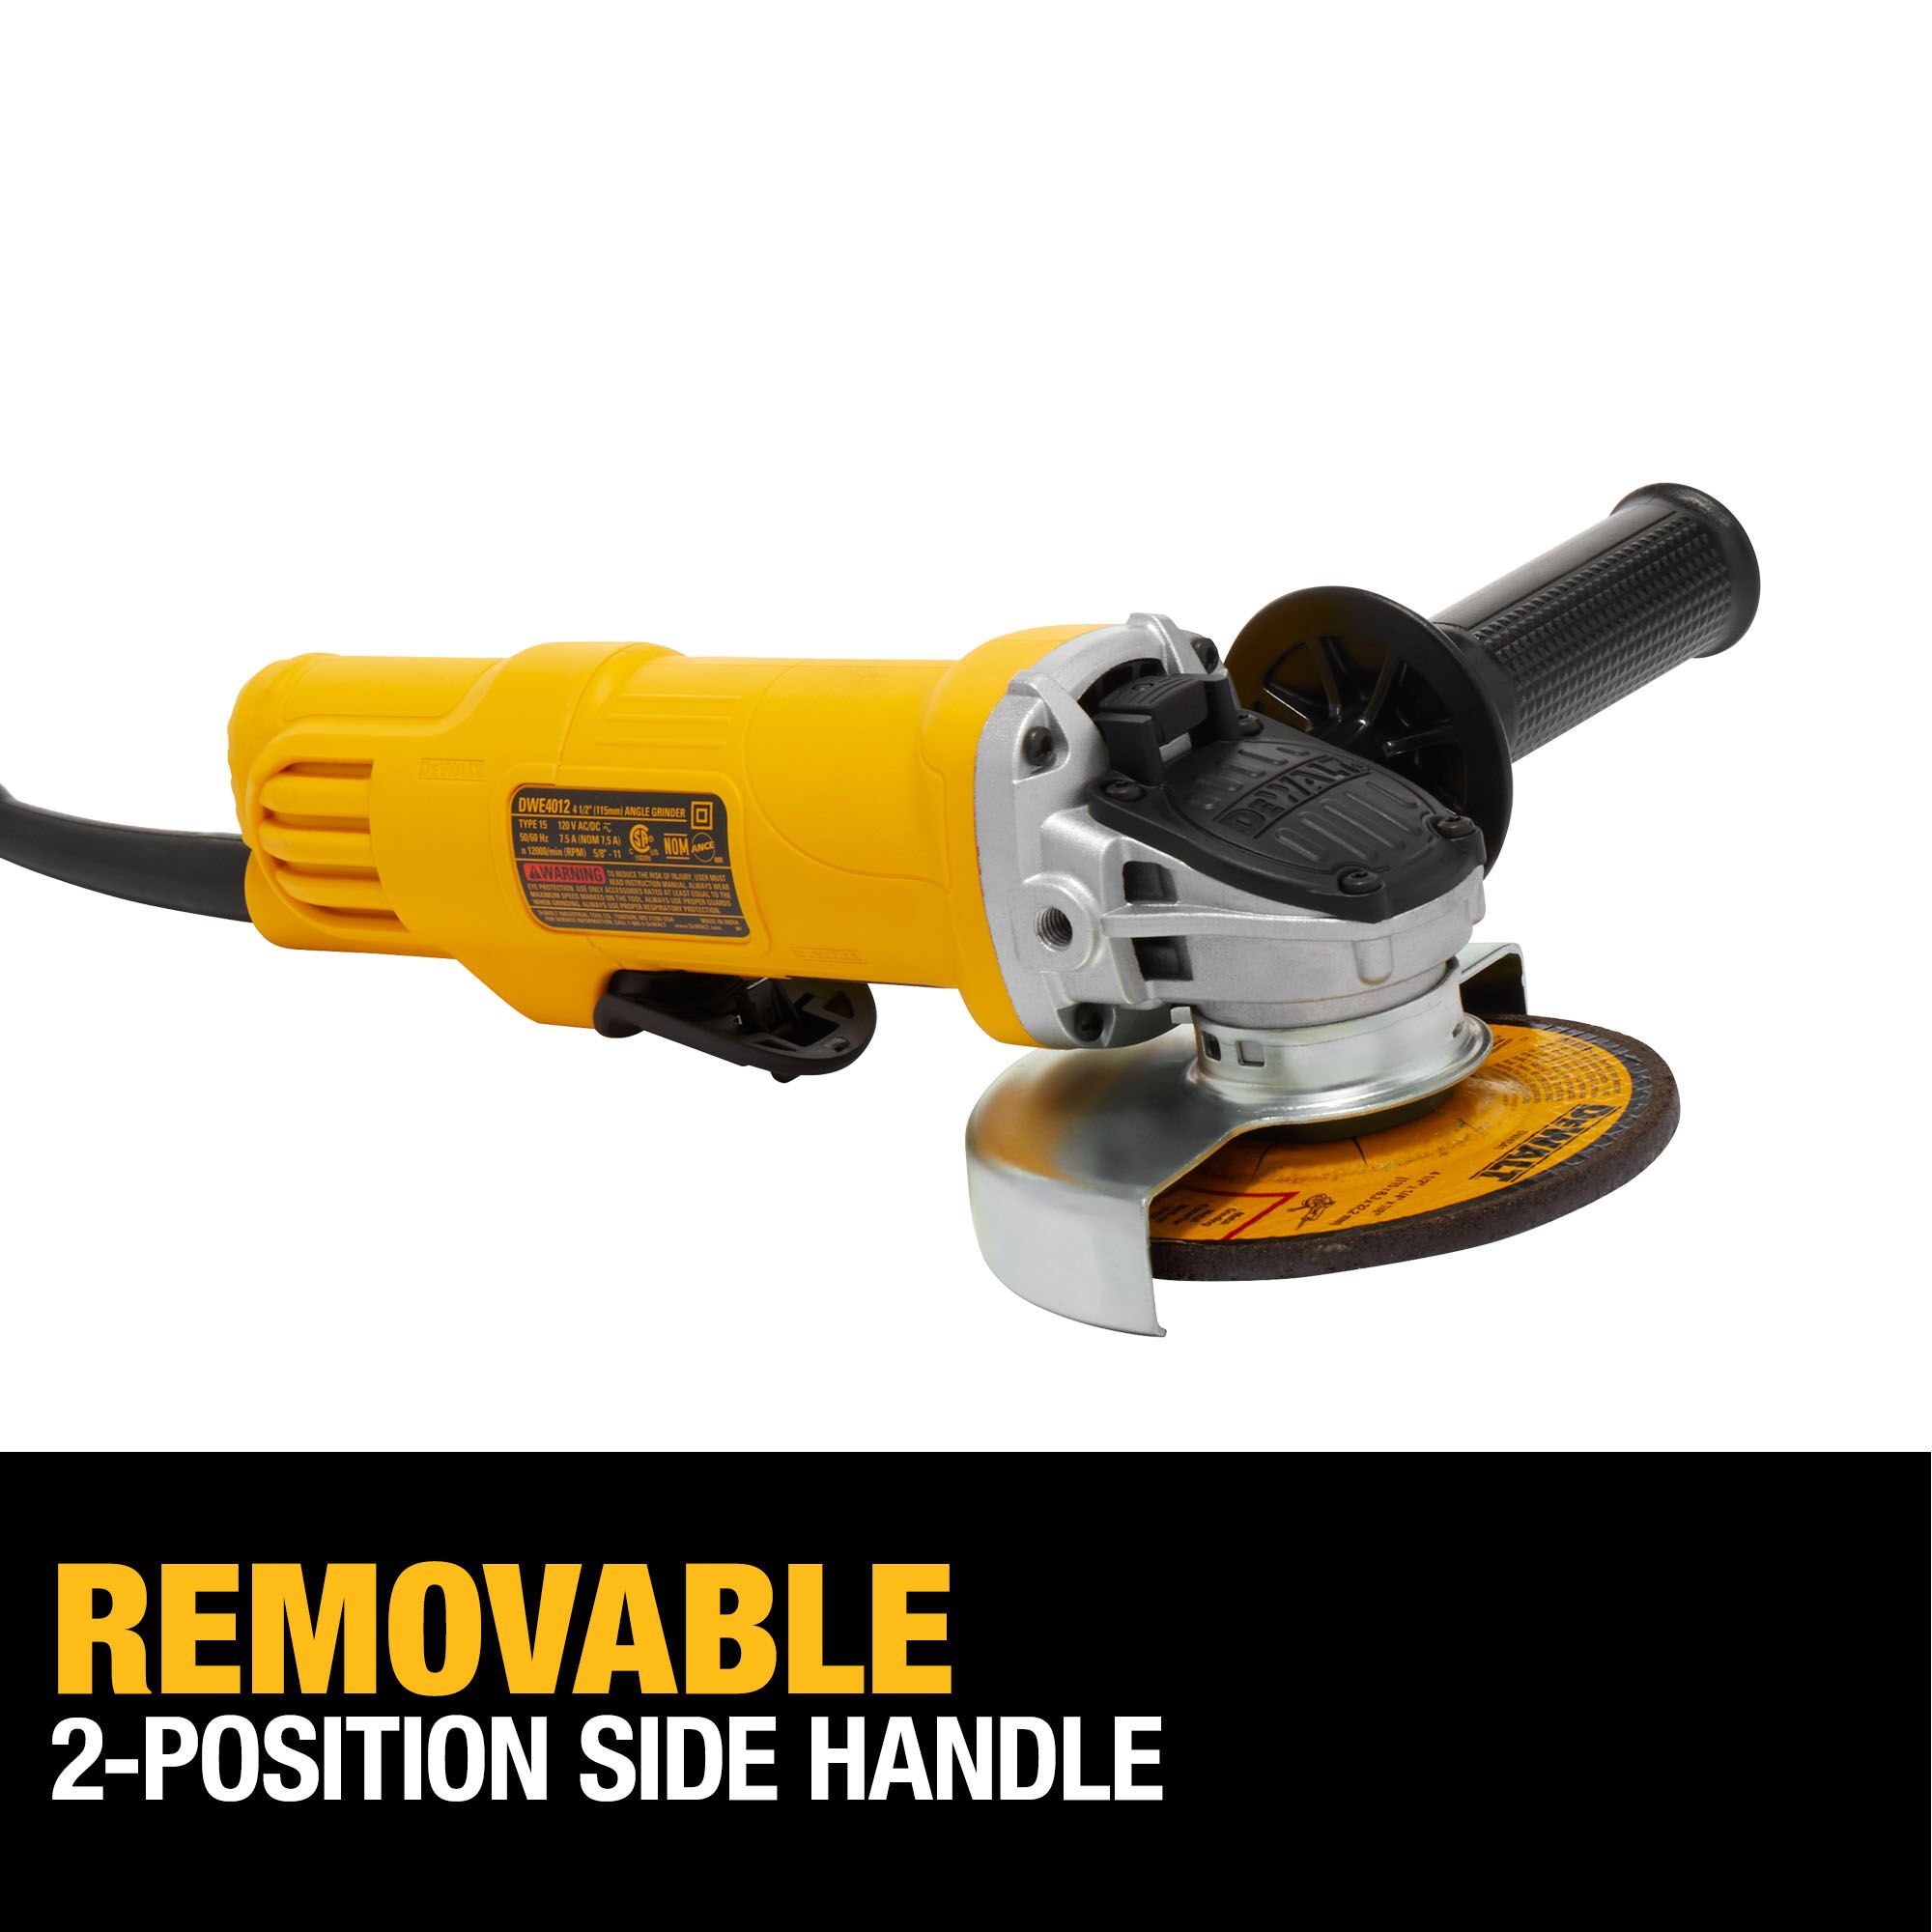 DEWALT 4.5-in Sliding Switch Corded Angle Grinder & Diamond 4-in